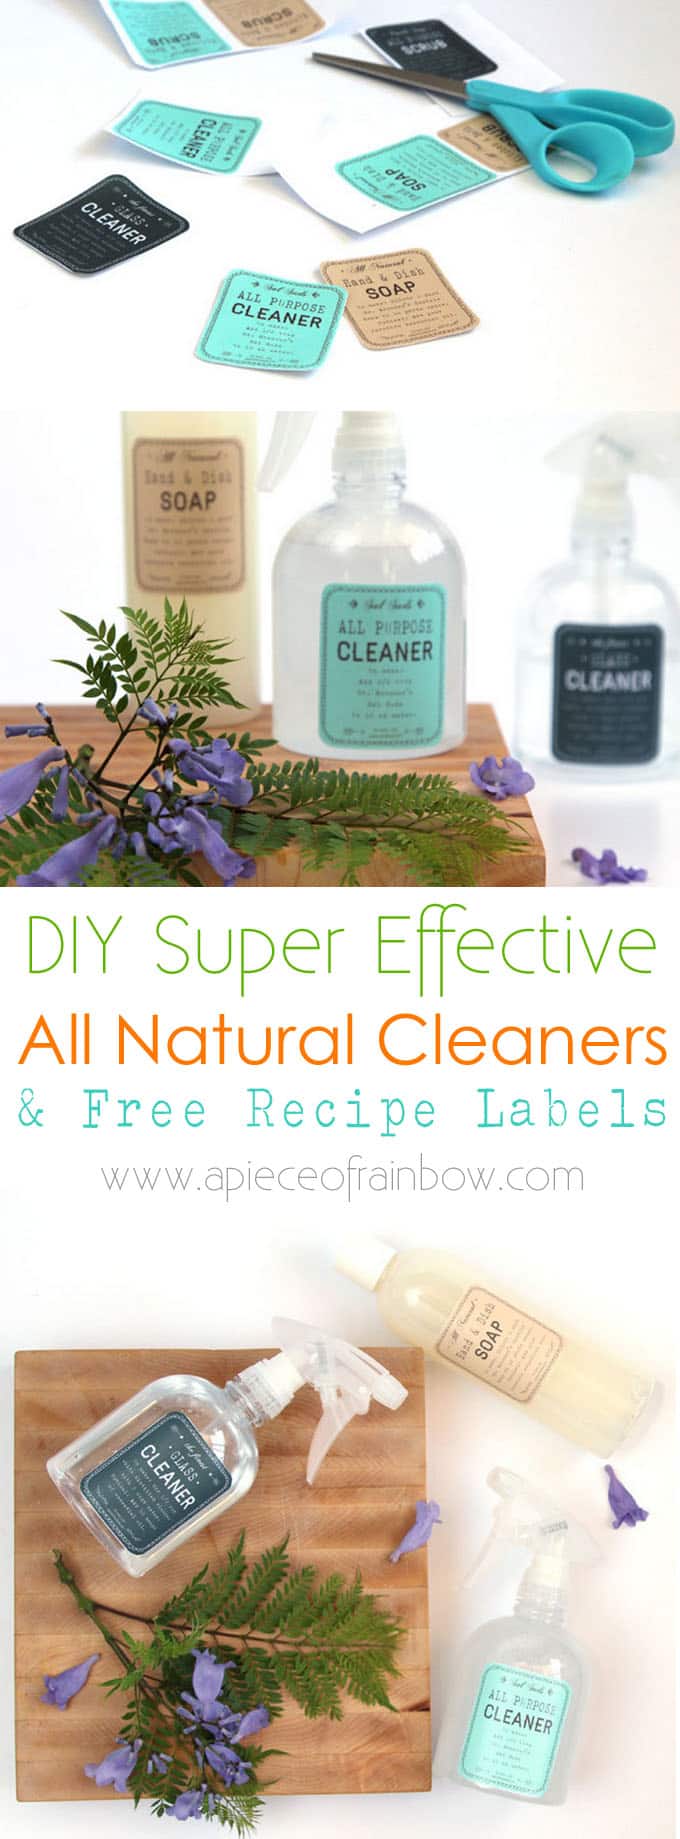 http://www.apieceofrainbow.com/wp-content/uploads/2016/06/DIY-natural-cleaning-products-apieceofrainbow-1.jpg